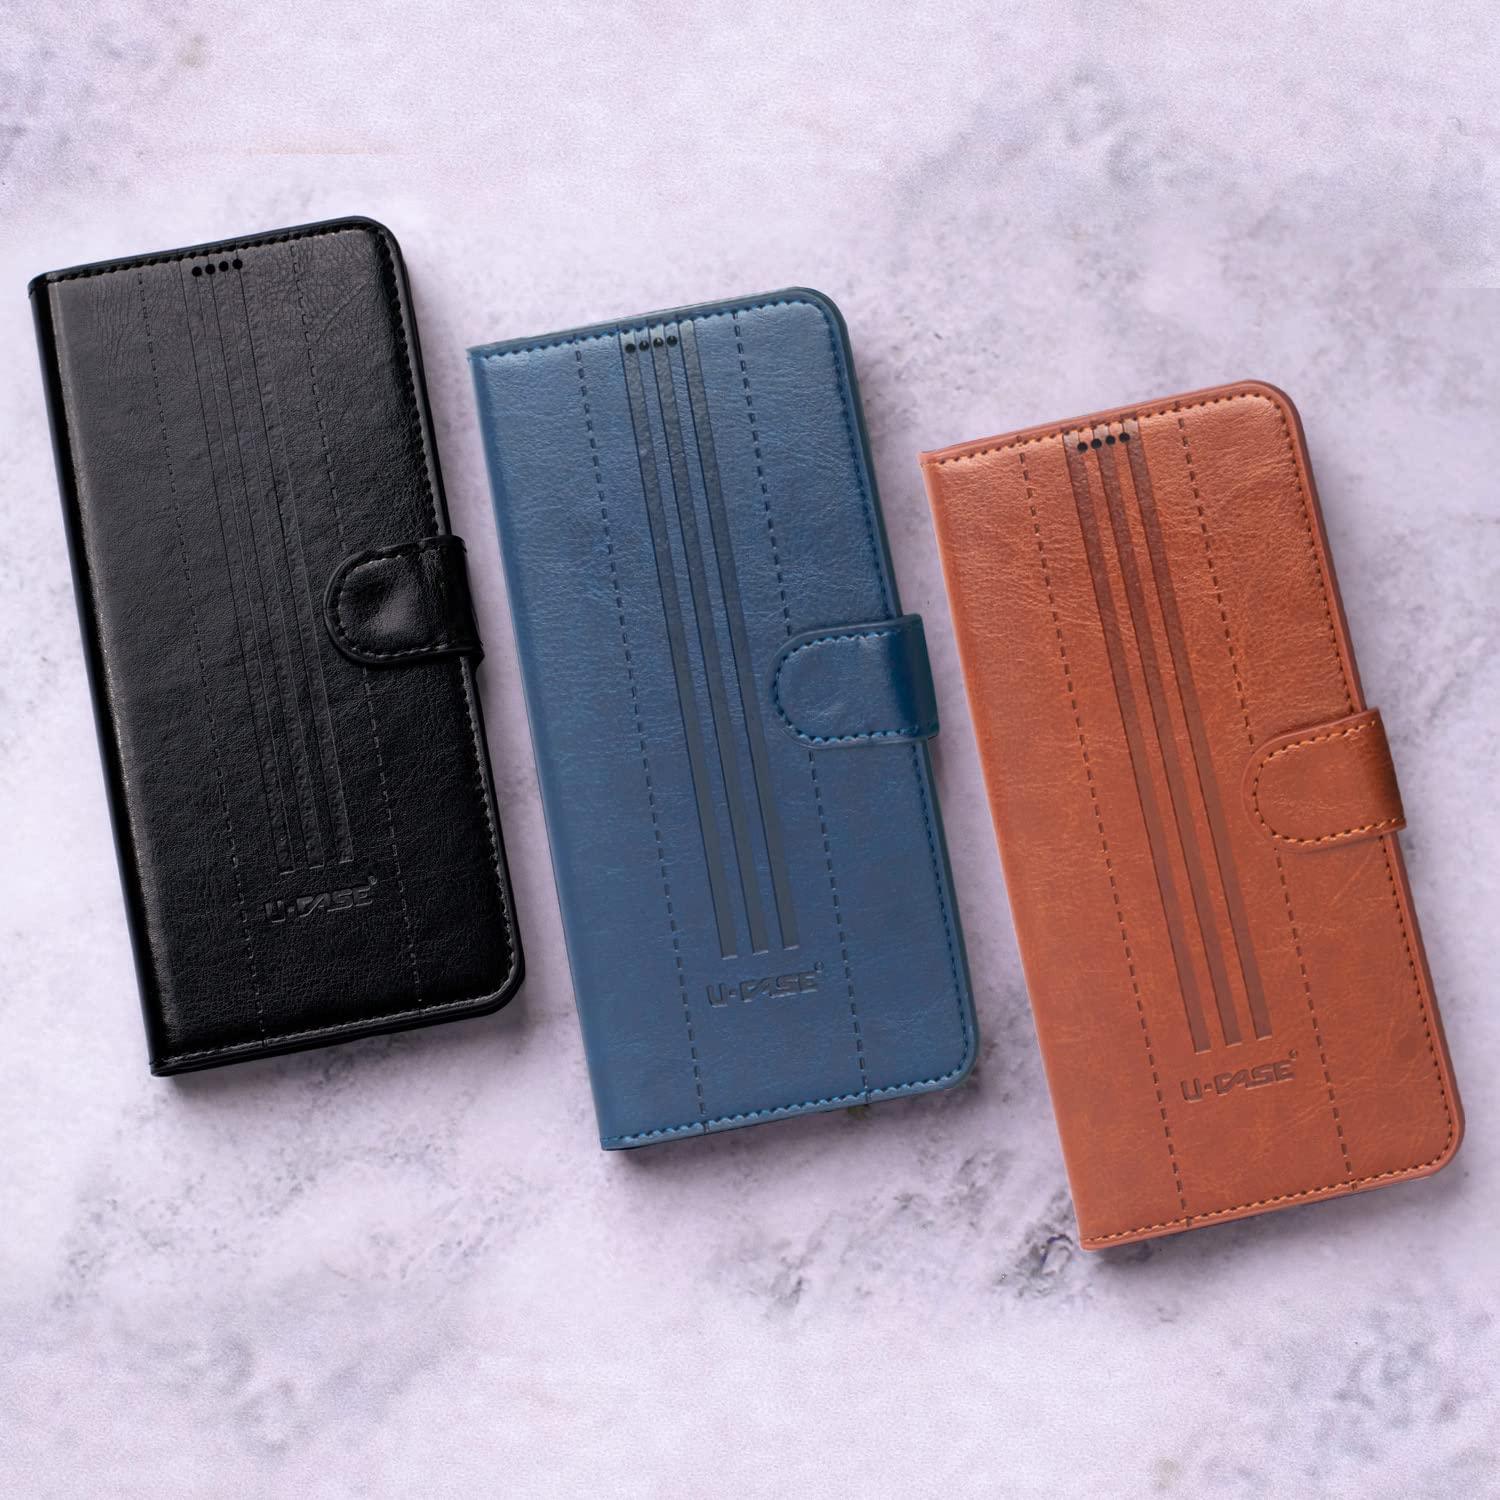 Shop U-CASE Flip Cover for Oppo A7 Vegan Foldable Stand & Pocket Magnetic Closure colors